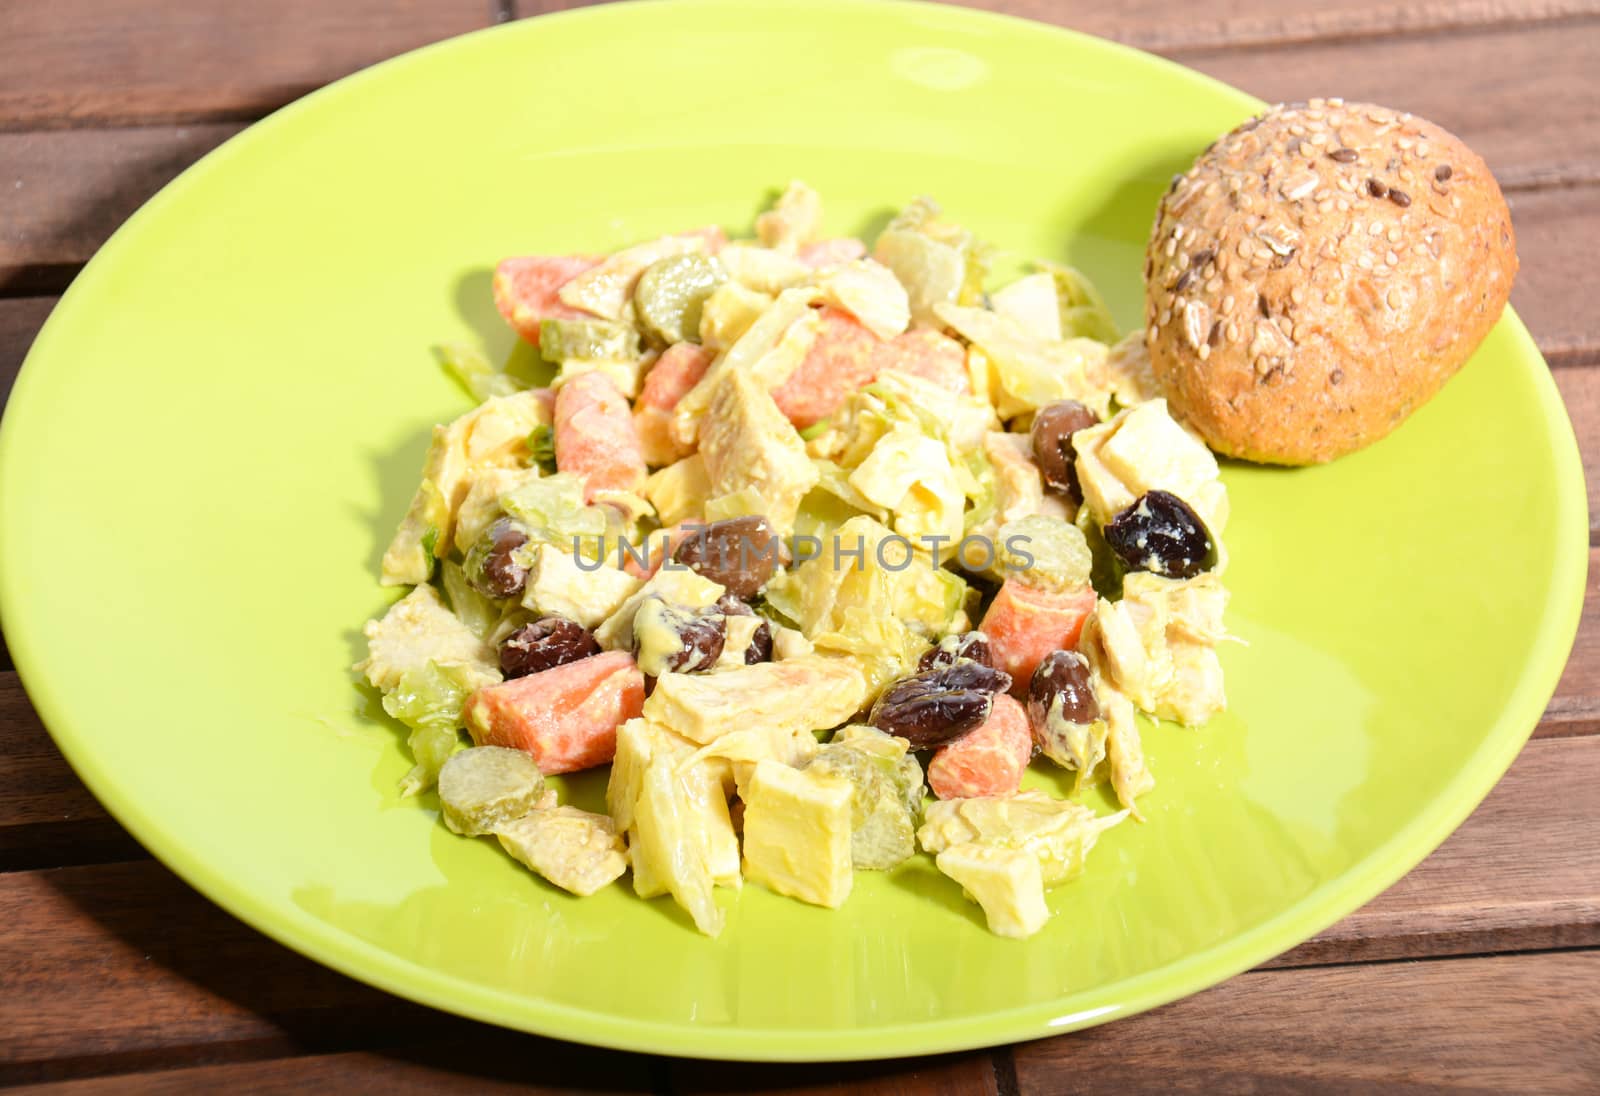 healthy food chicken salad by iacobino